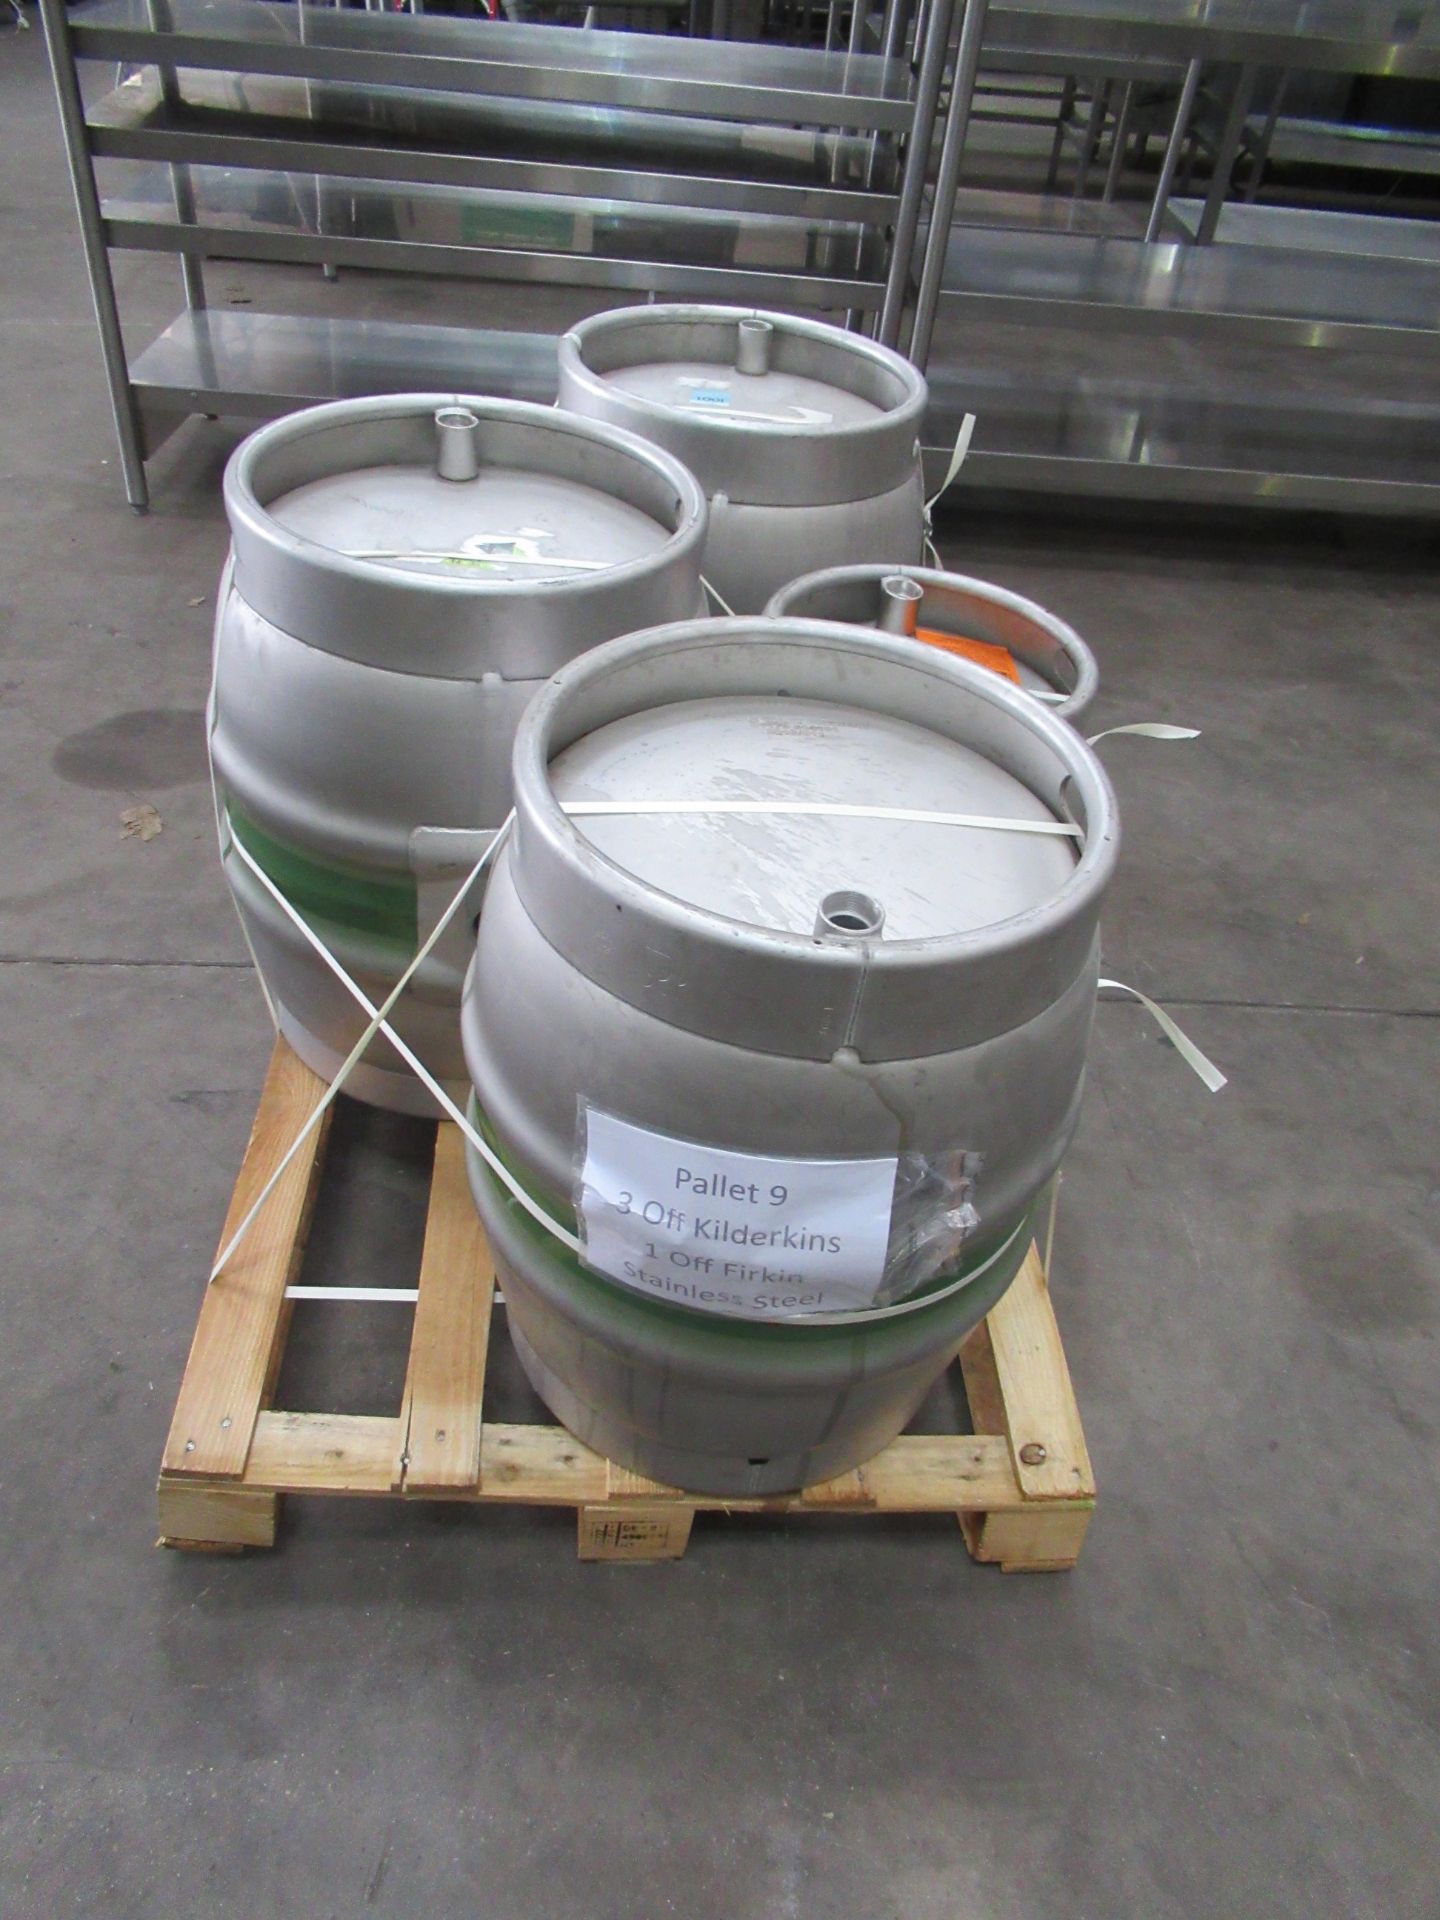 3x Stainless Steel Kilderkins and 1x Stainless Steel Firkin - Image 2 of 4